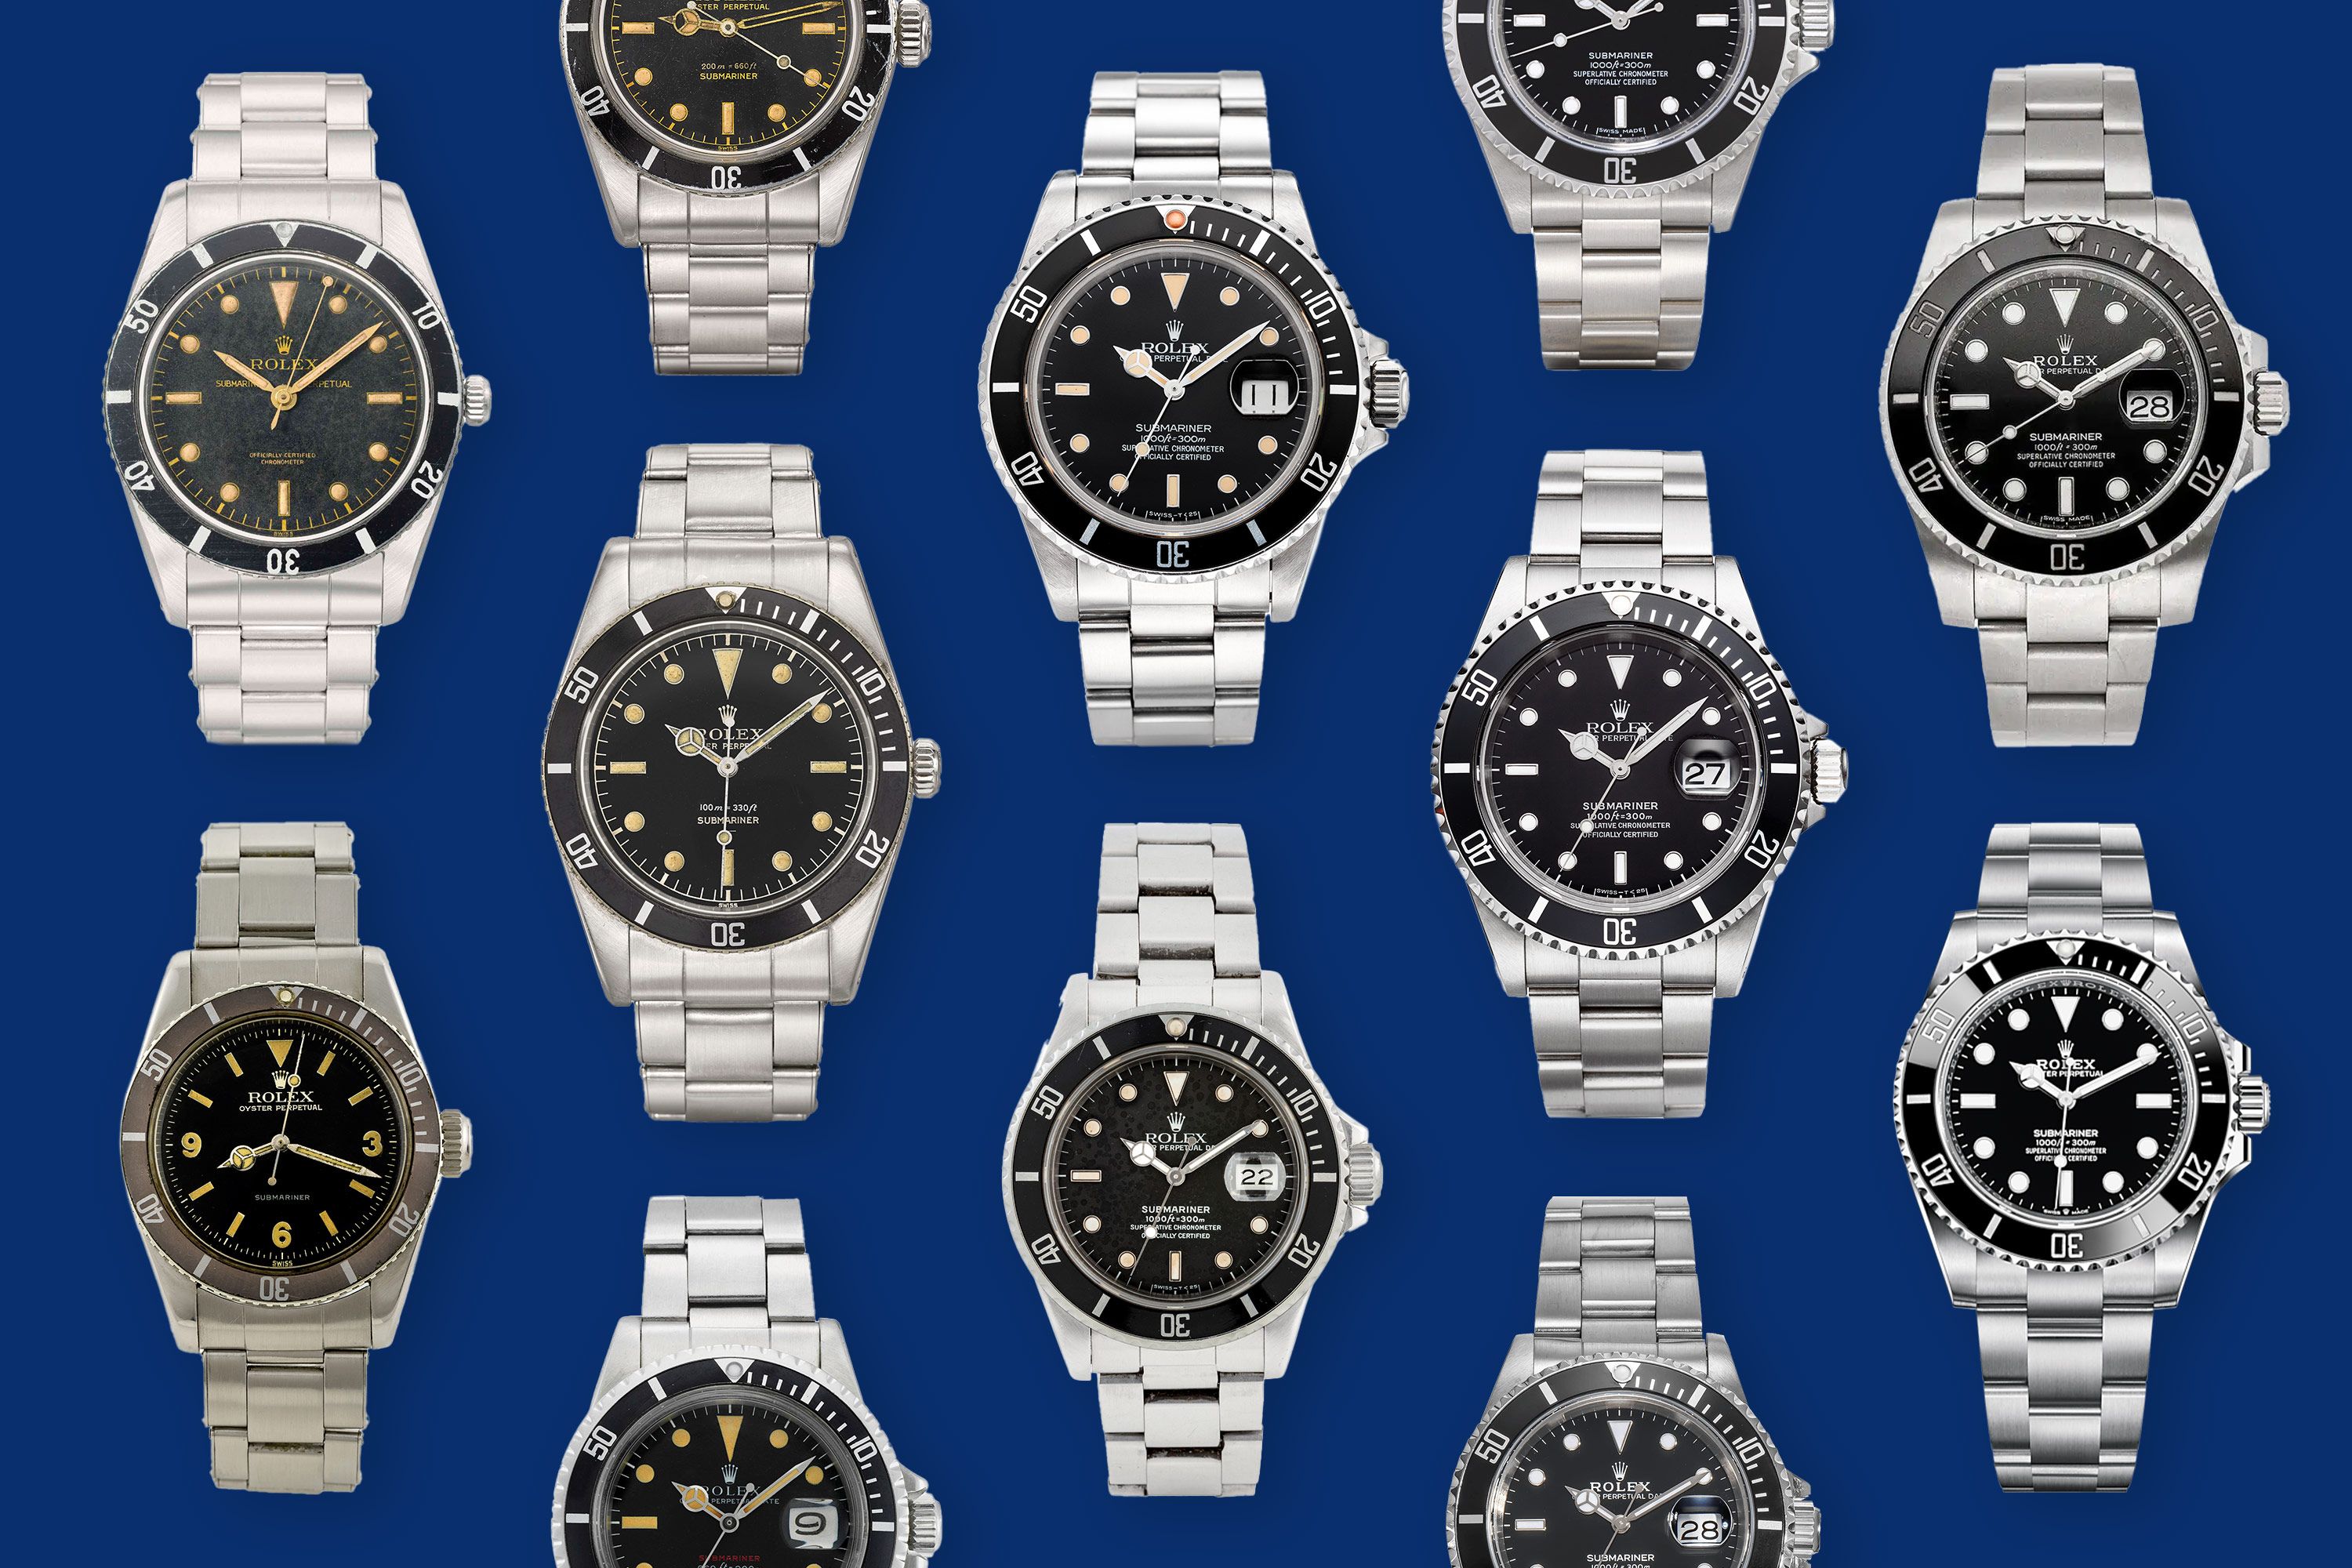 The Rolex Submariner: Everything You Need to Know